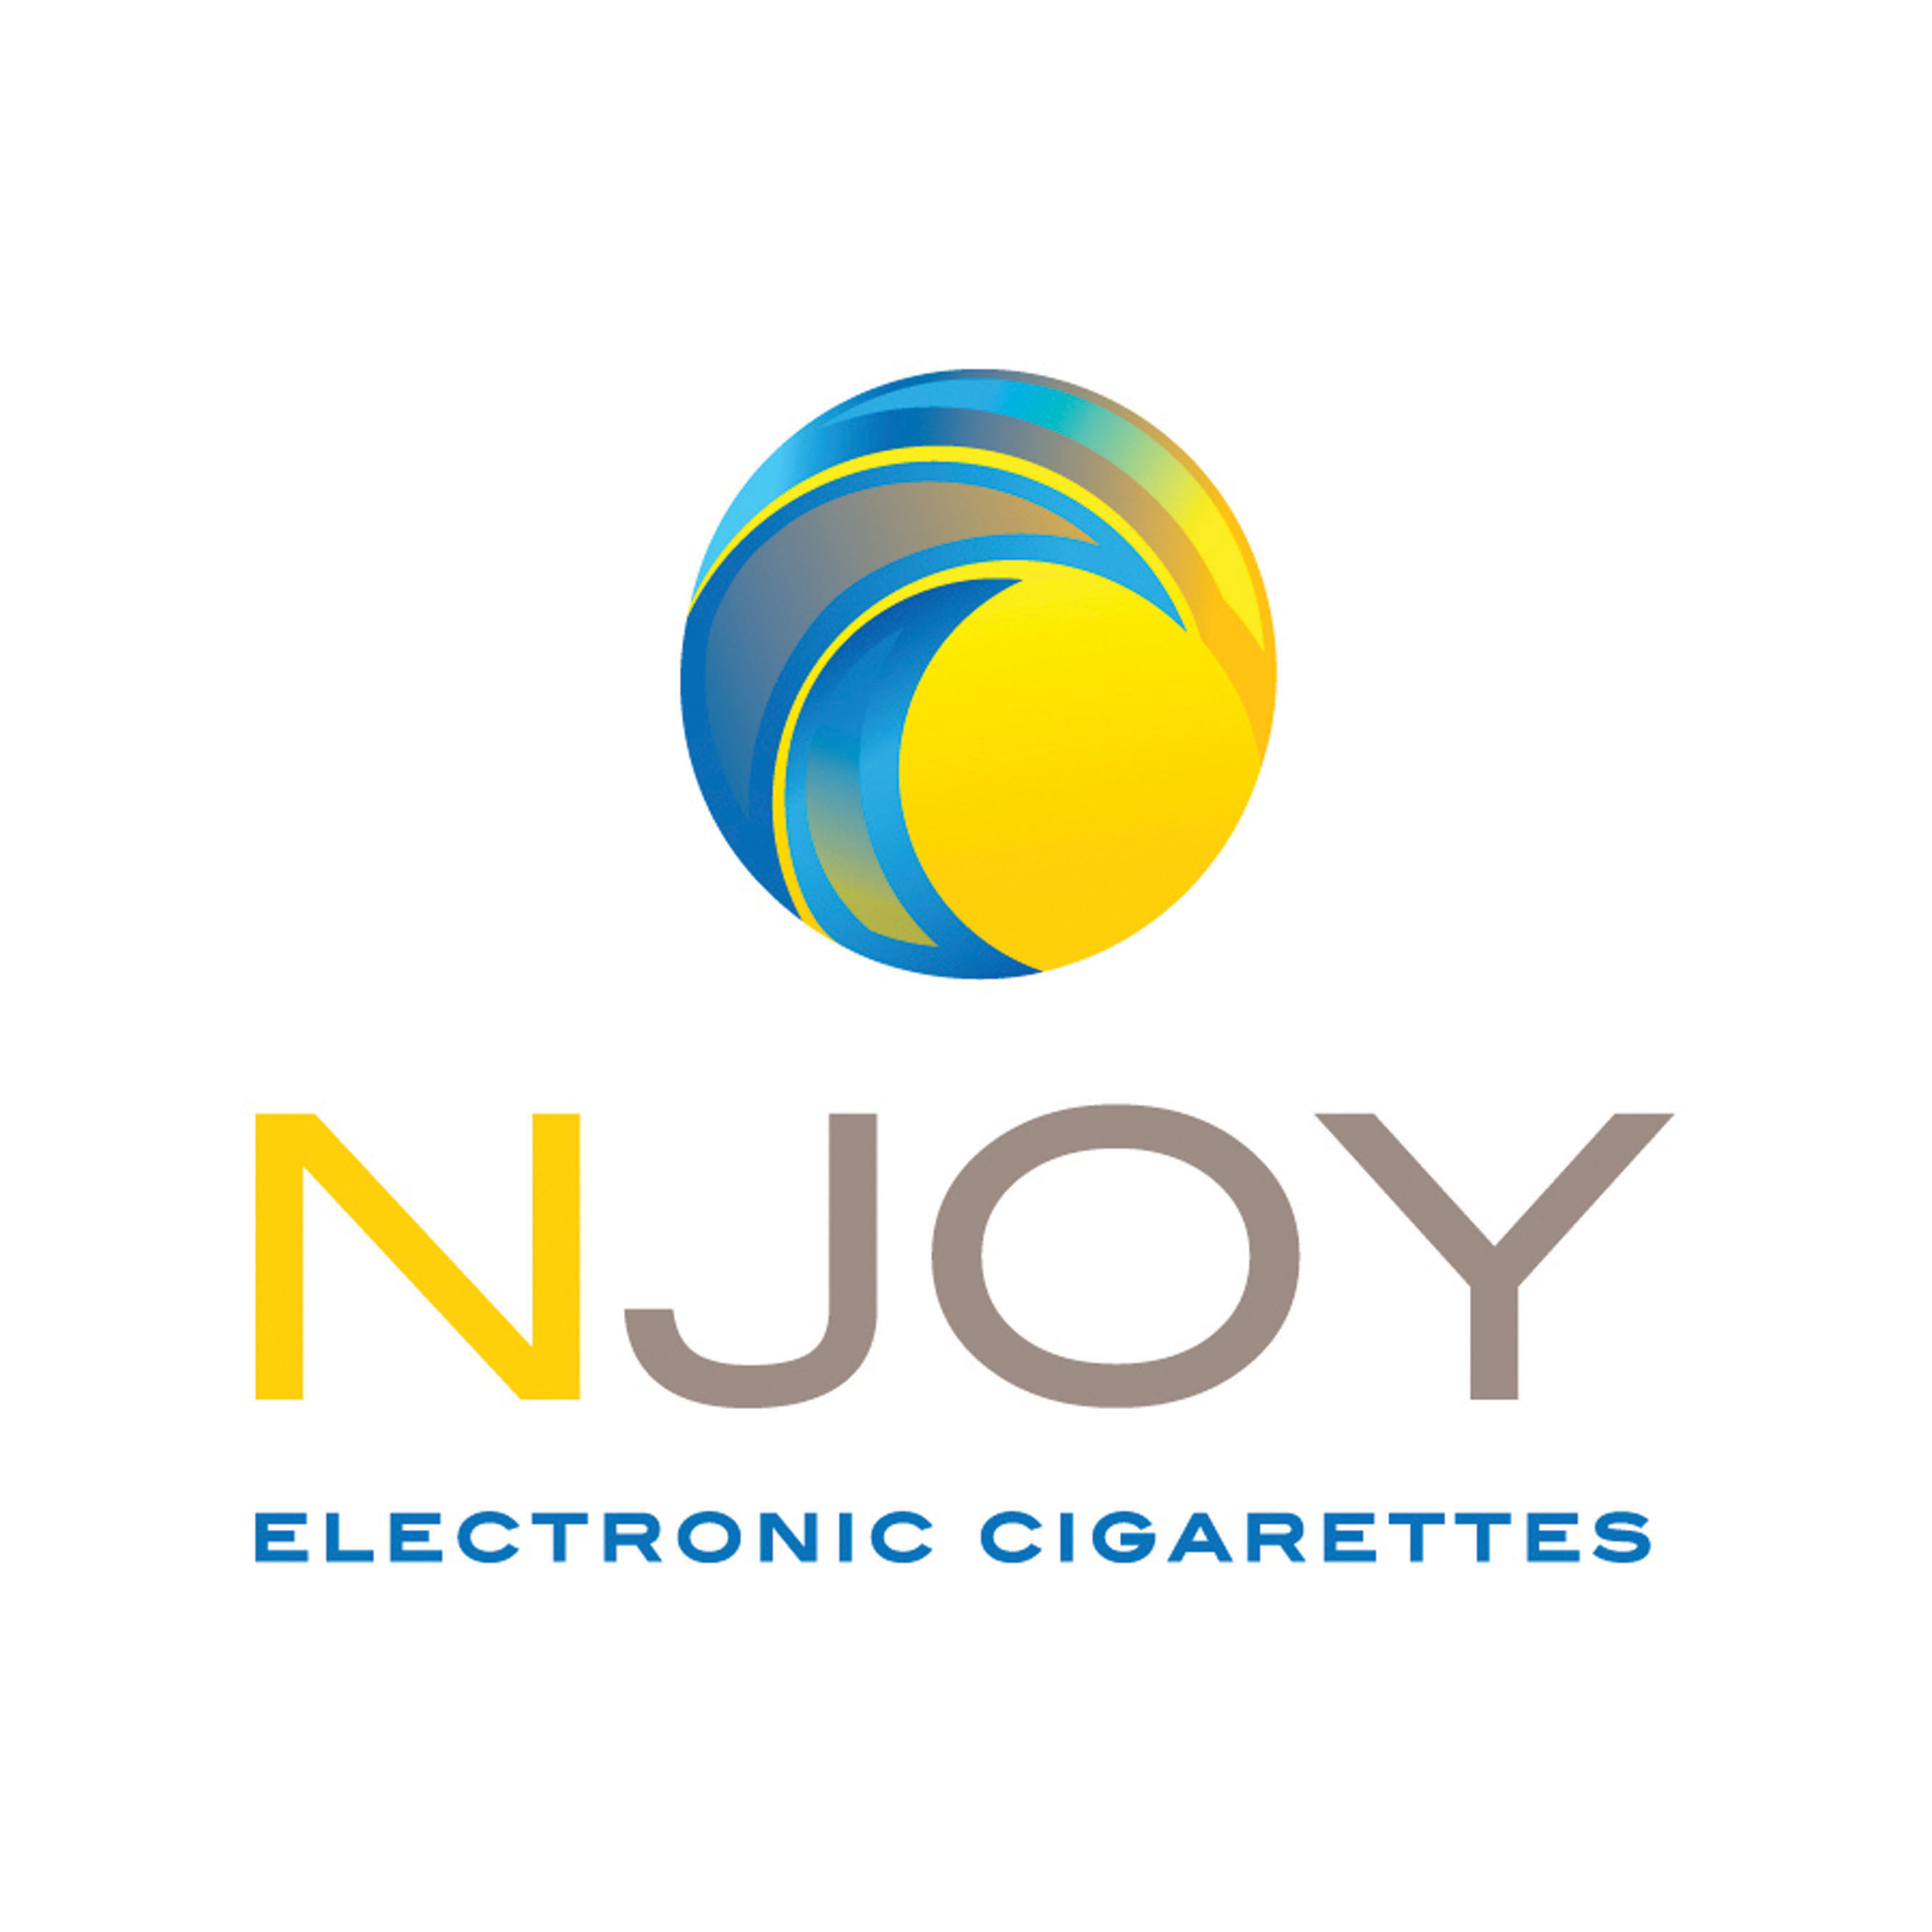 NJOY Electronic Cigarettes Receives $20 Million Investment from Leading ...